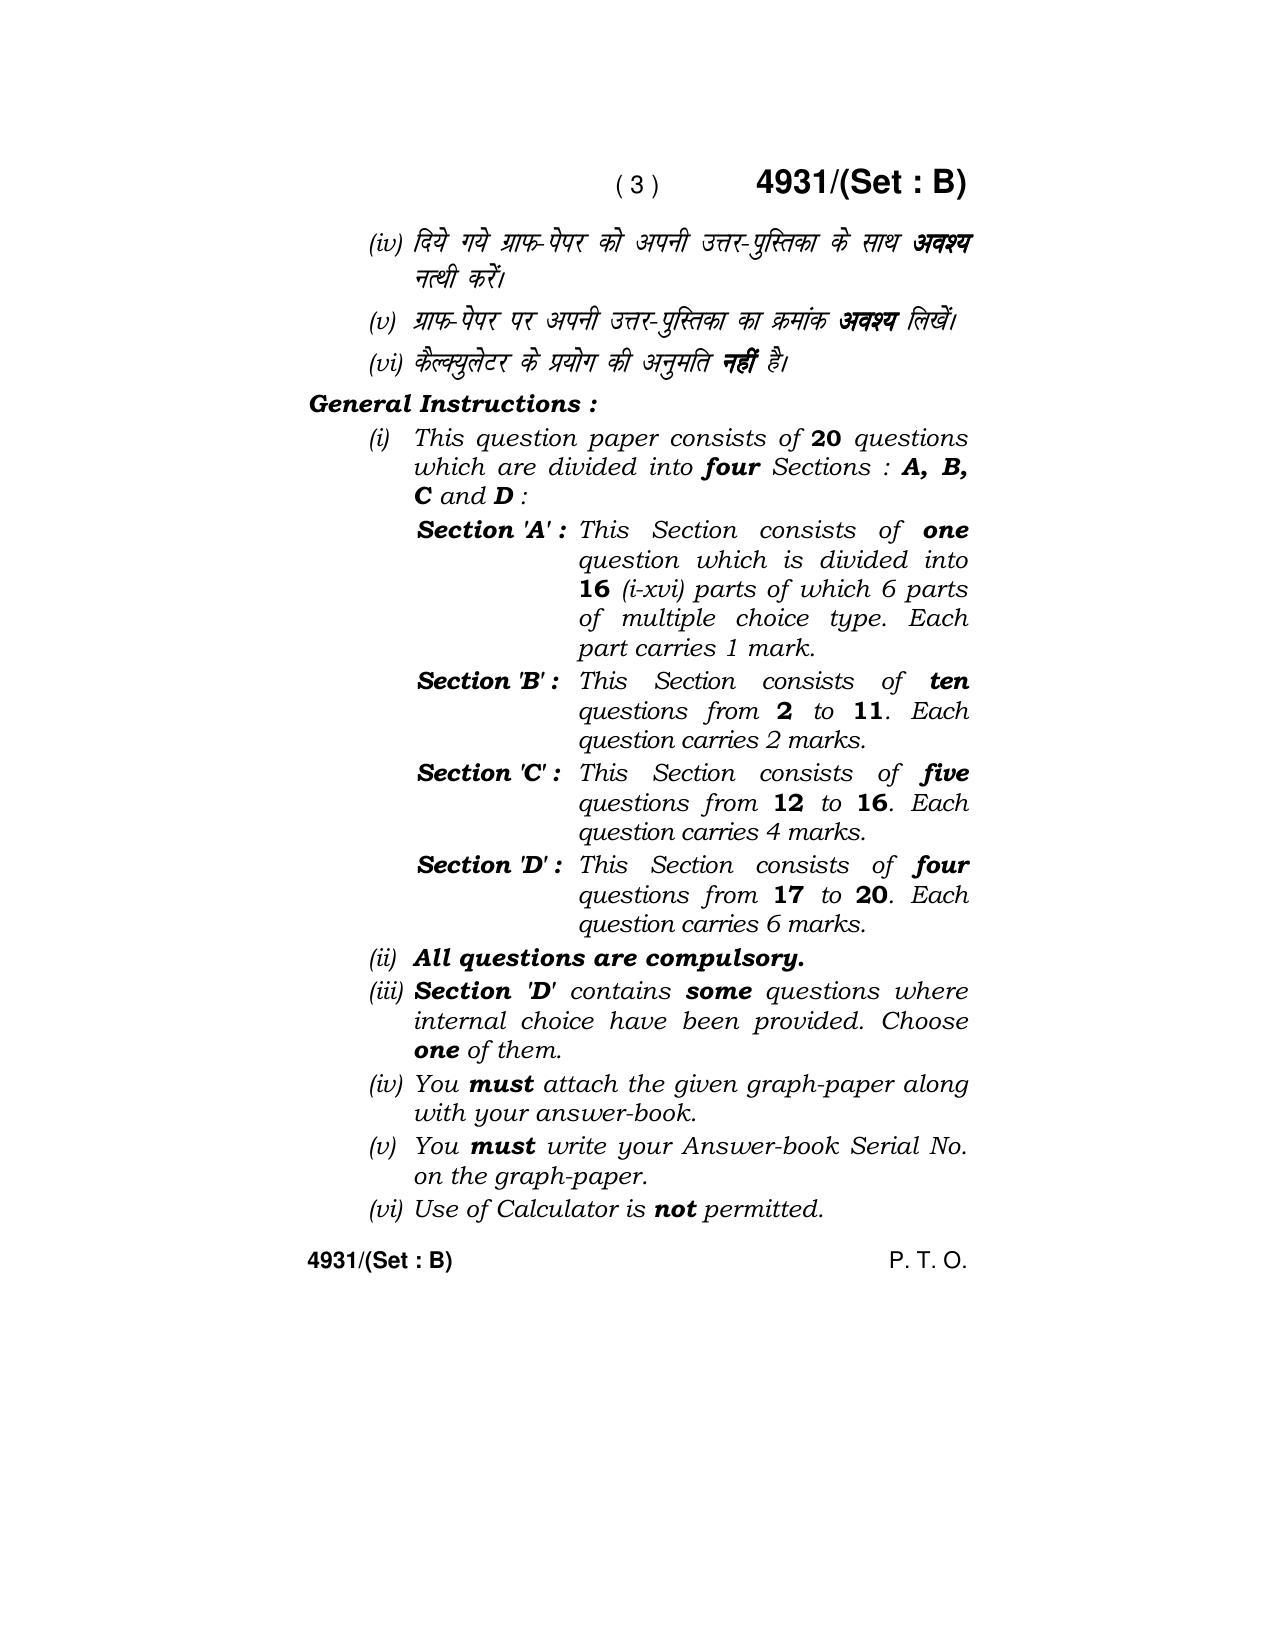 Haryana Board HBSE Class 12 Mathematics 2020 Question Paper - Page 19